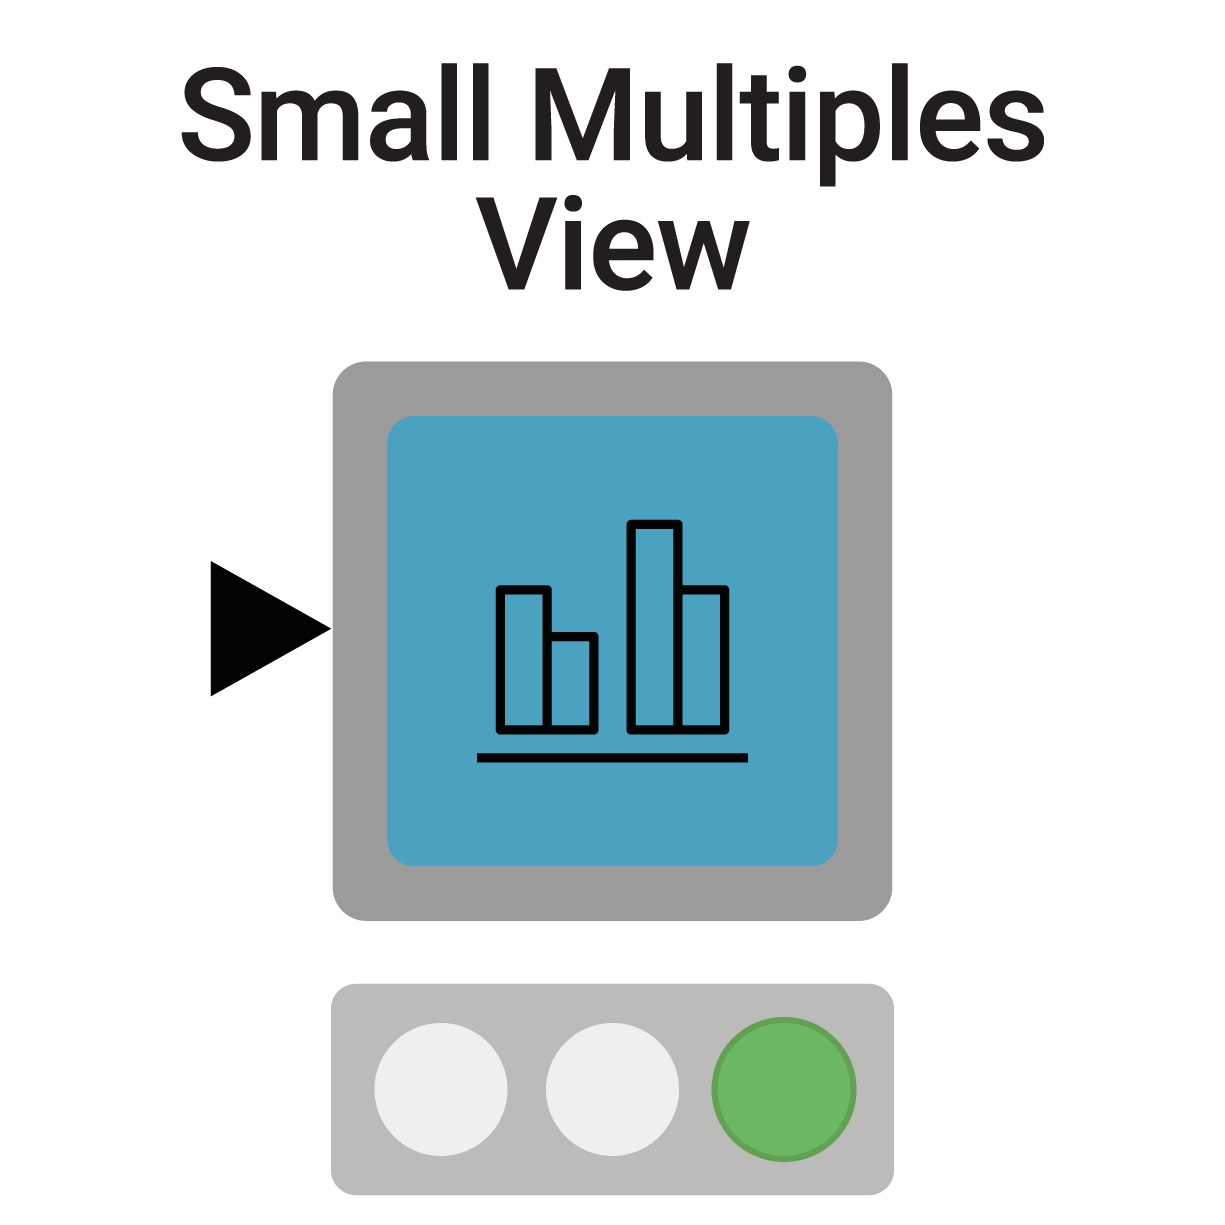 Small Multiples View